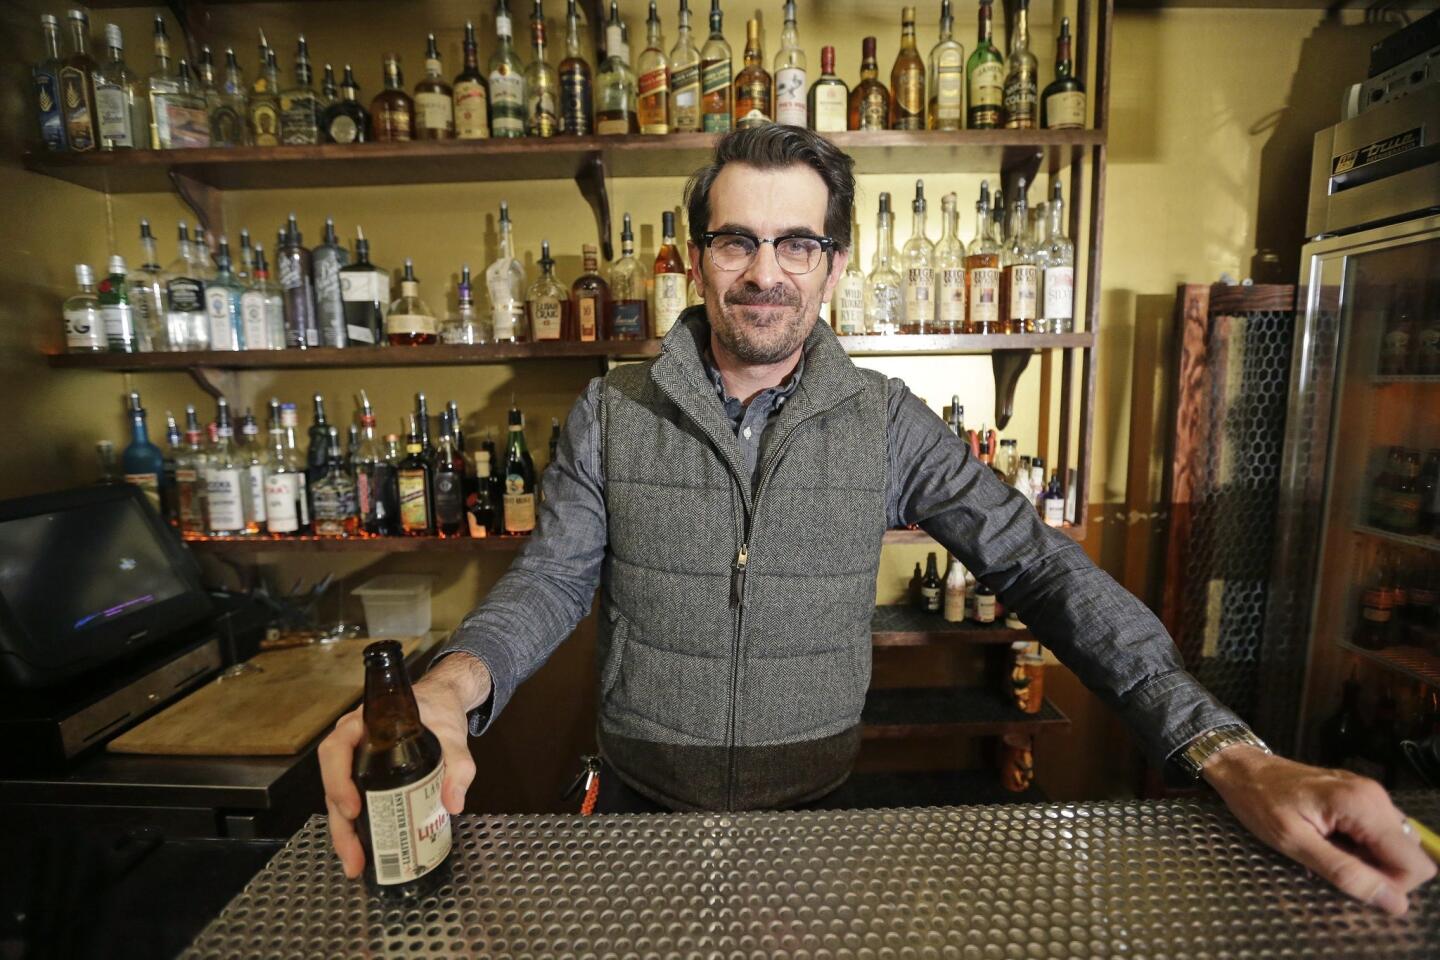 Ty Burrell poses with a beer at the bar he co-owns in Salt Lake City, Bar-X.